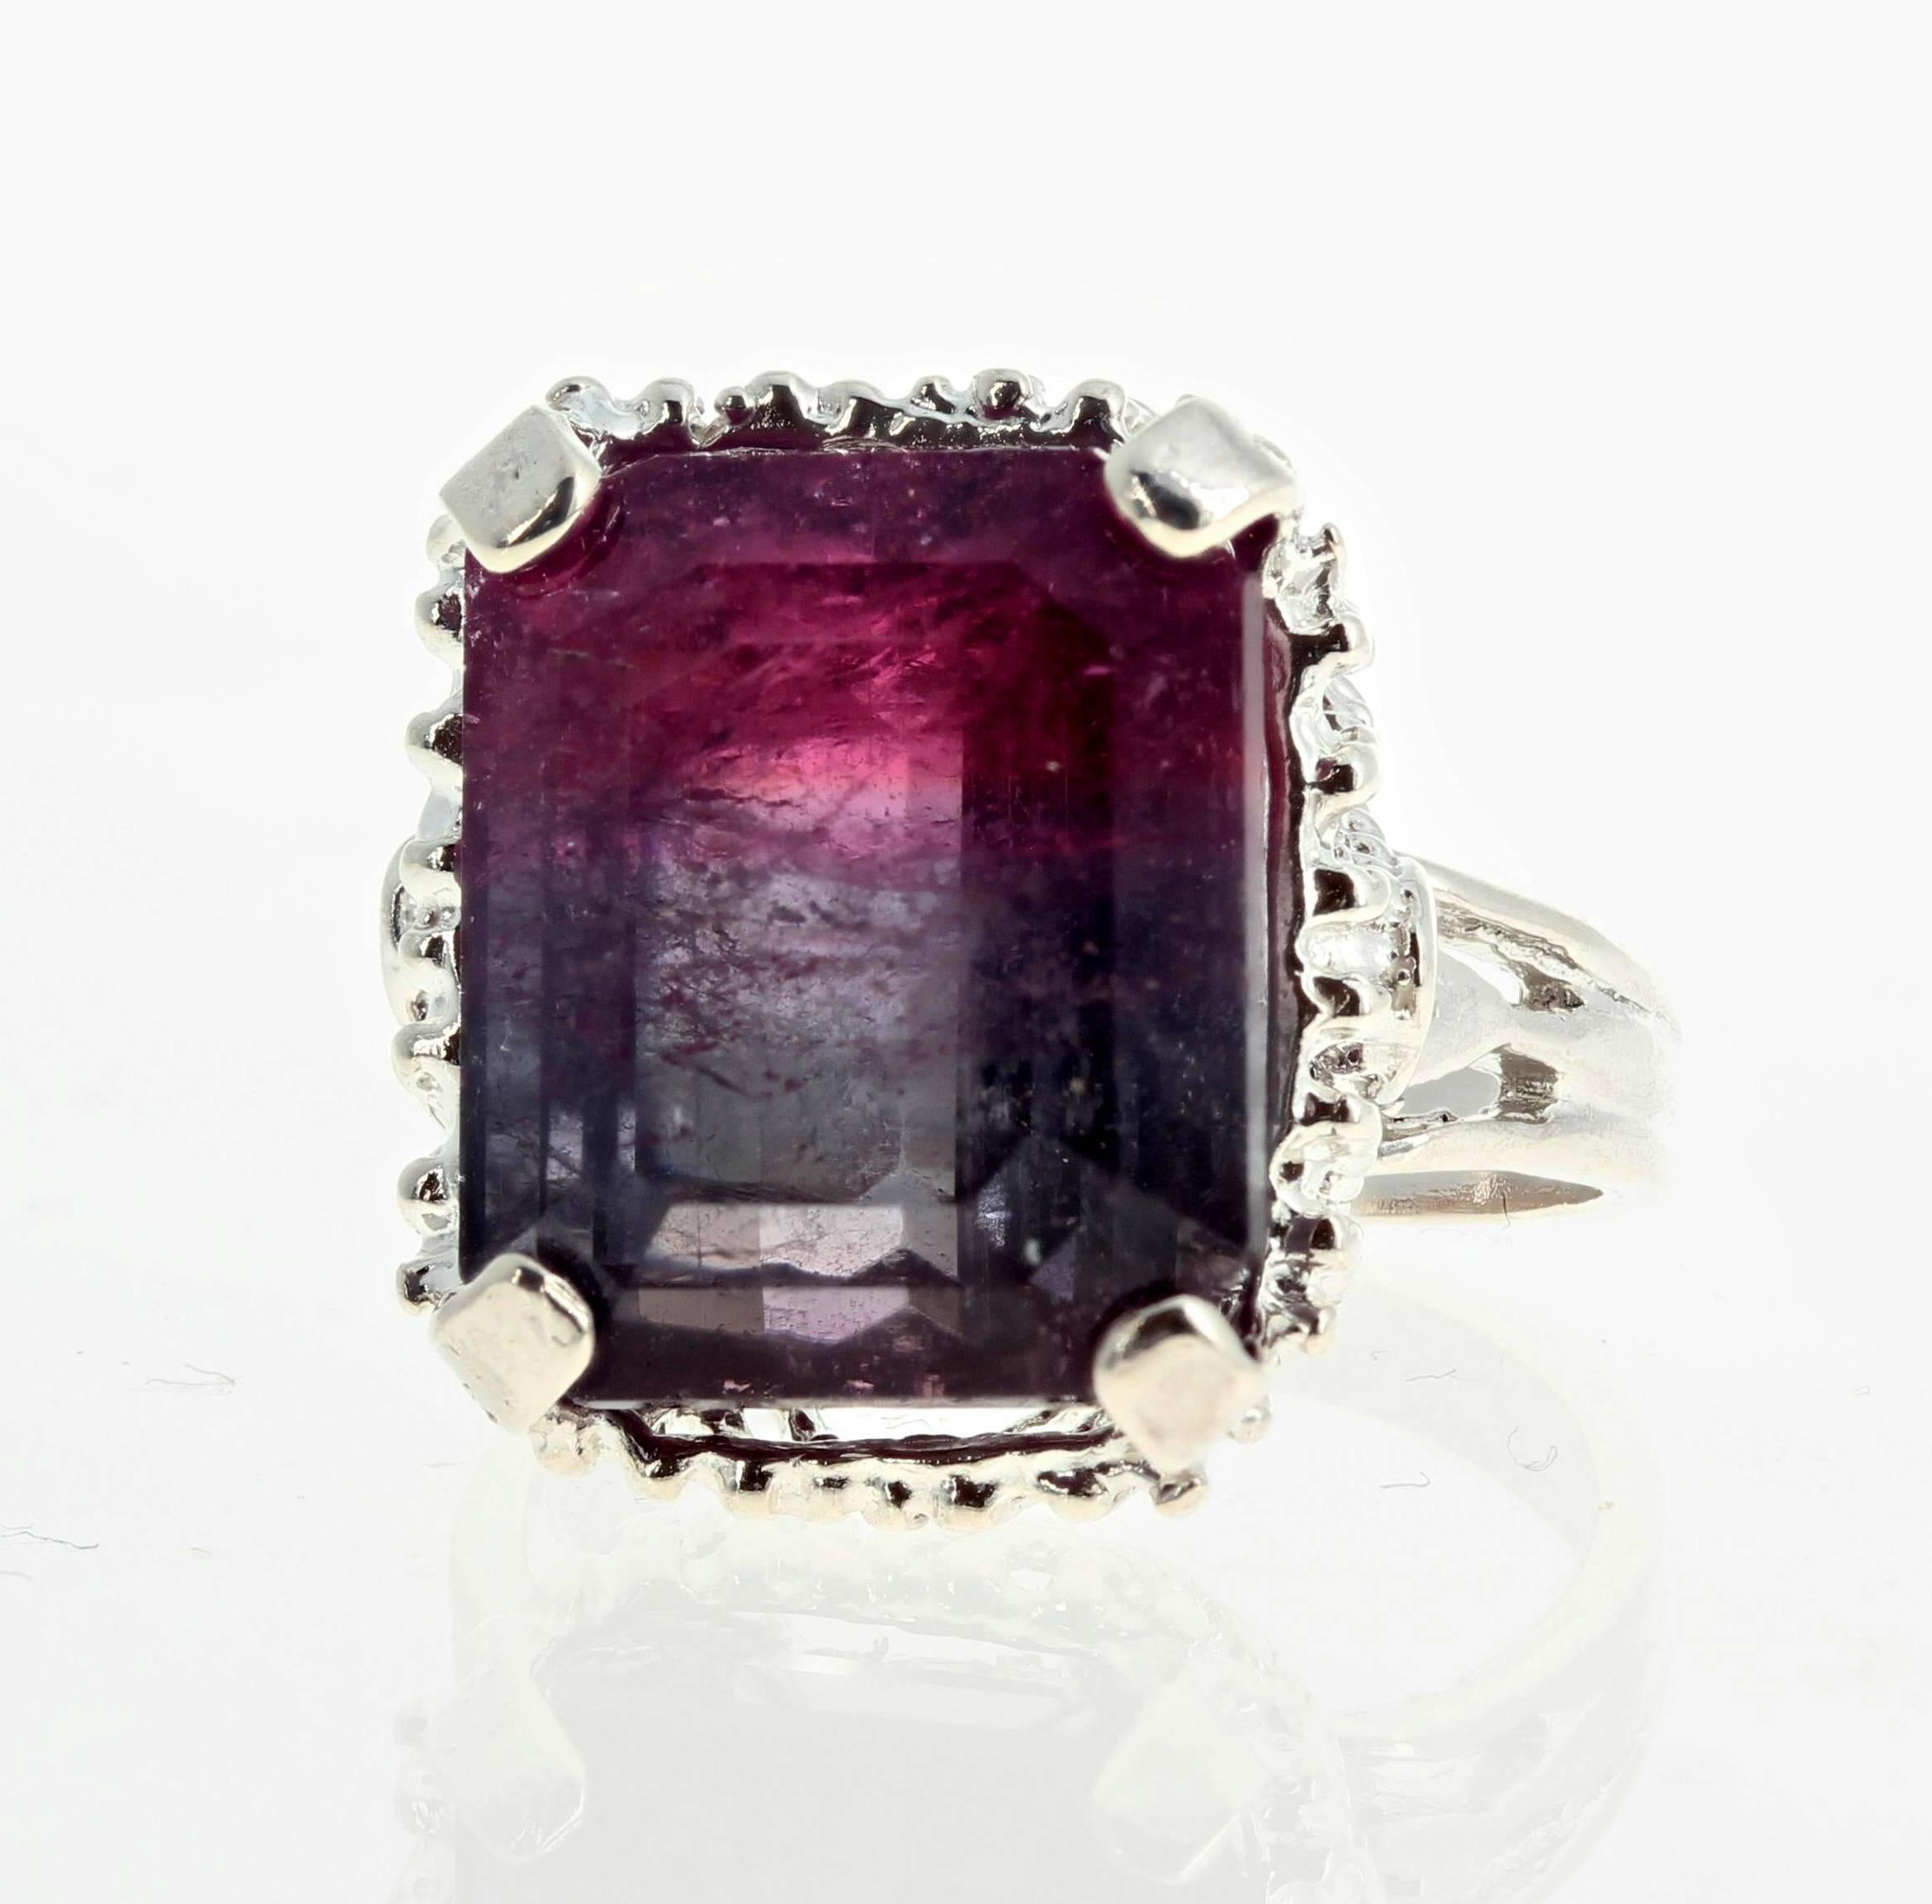 Large glowing 14.95 carat Bi-Color (purplish and red) emerald cut Tourmaline (12.7 mm x 14.9 mm) set in a sterling silver ring size 7 (sizable).    More from this seller by putting gemjunky into 1stdibs search bar.